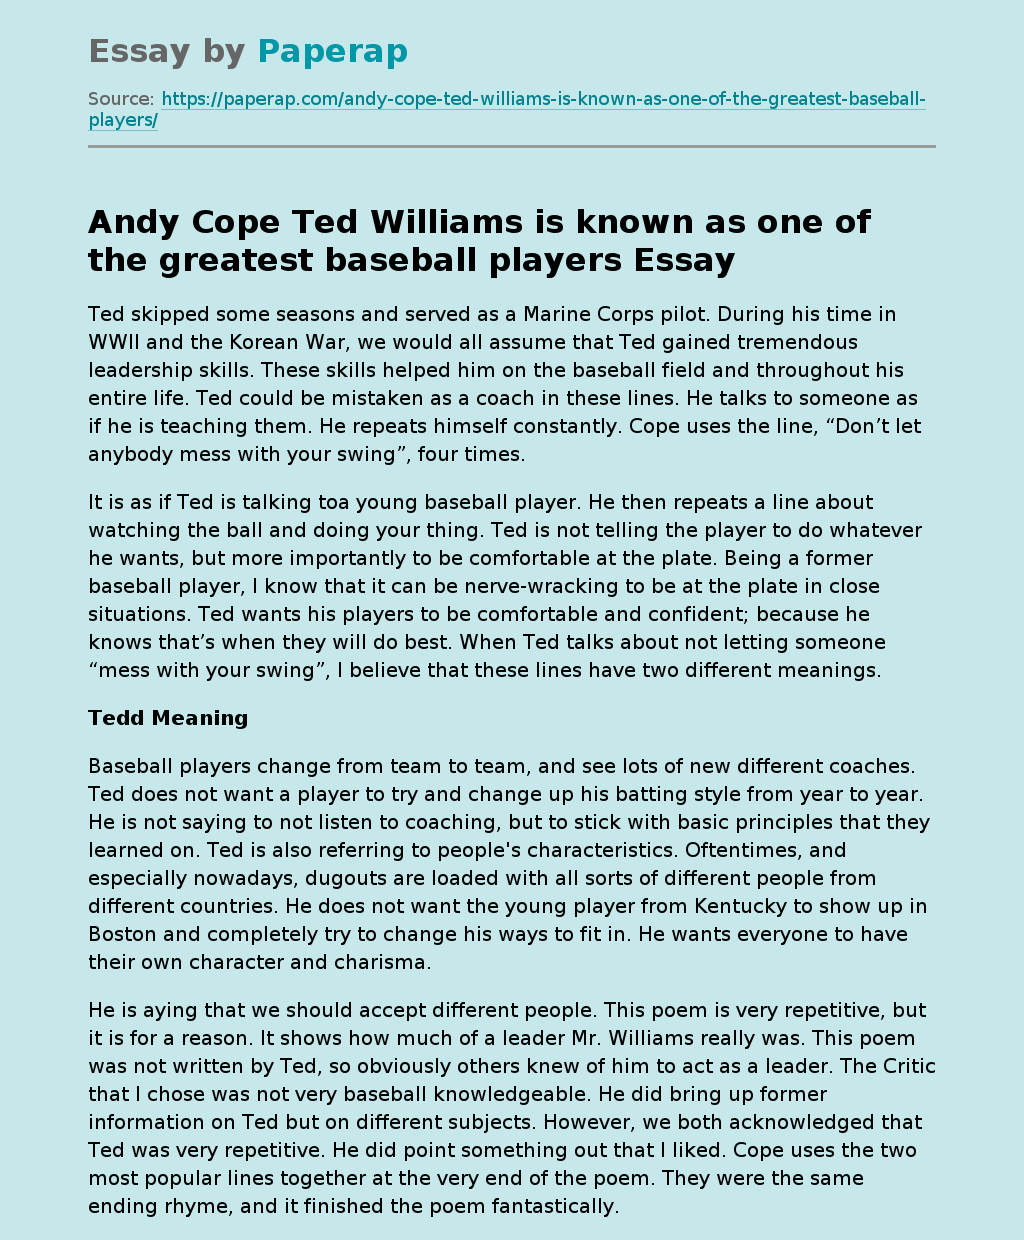 Andy Cope Ted Williams is known as one of the greatest baseball players